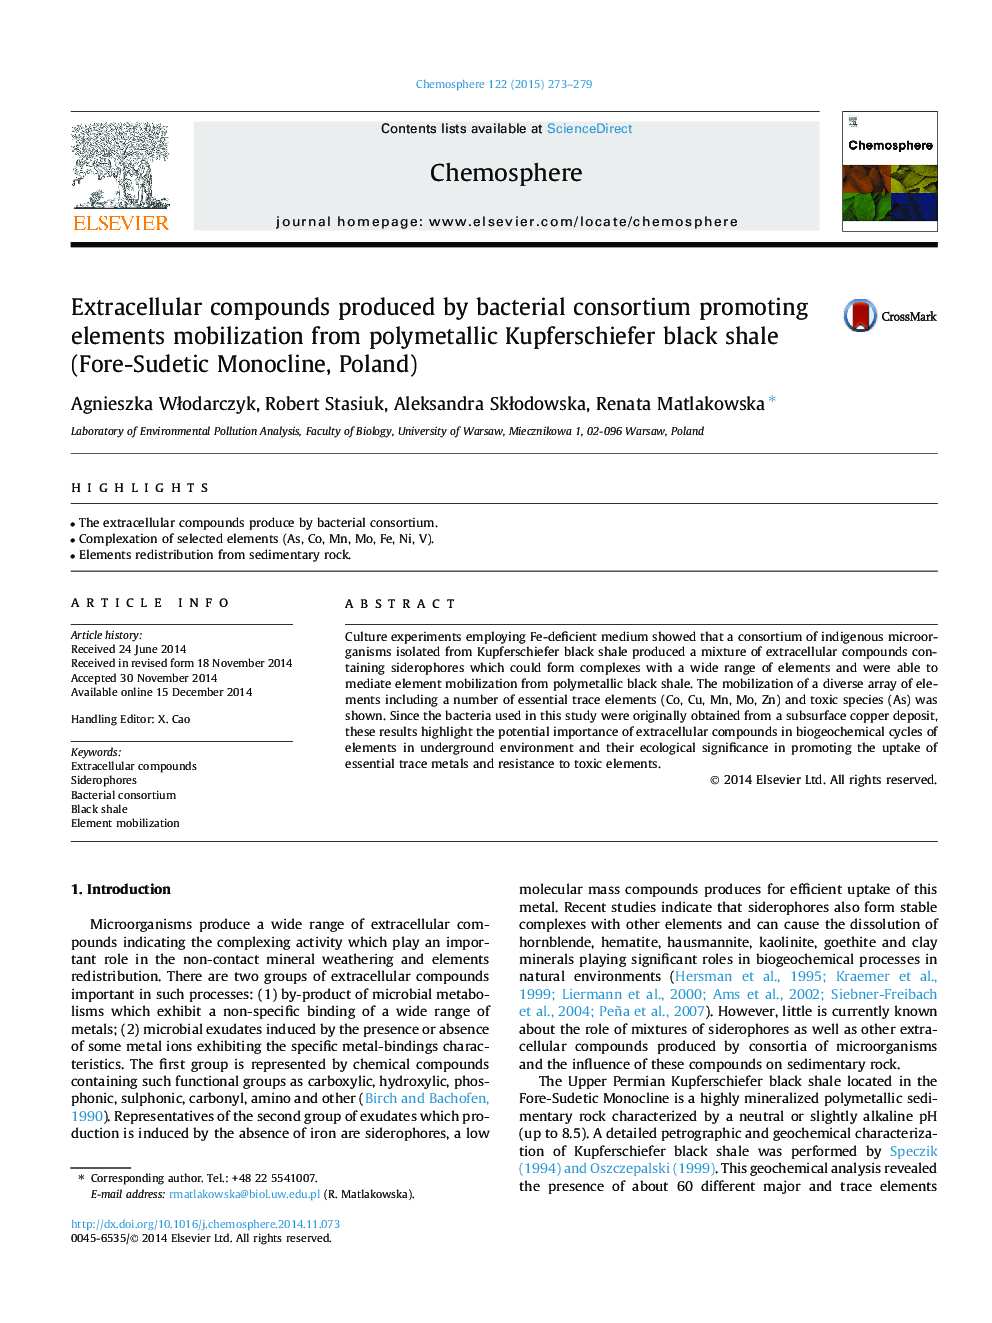 Extracellular compounds produced by bacterial consortium promoting elements mobilization from polymetallic Kupferschiefer black shale (Fore-Sudetic Monocline, Poland)